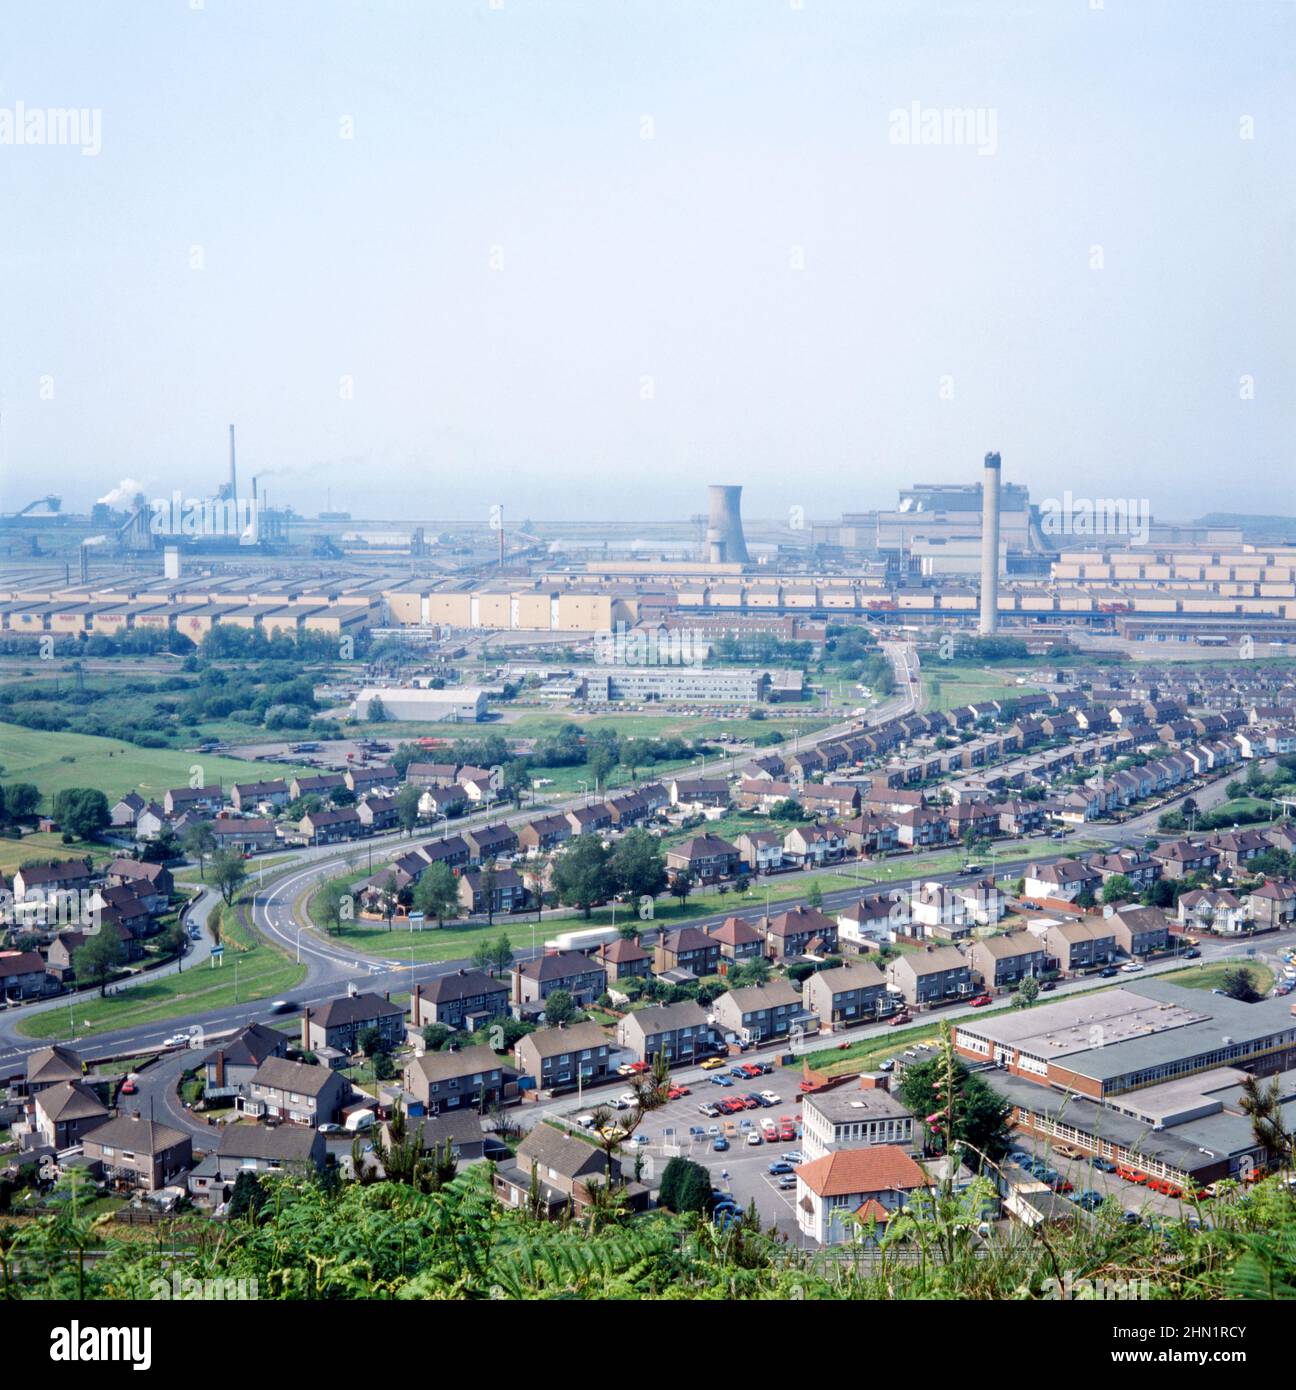 A view of the Port Talbot Steelworks, an integrated steel production plant in Port Talbot, West Glamorgan, Wales, UK c. 1980. The main access road at this time was Cefn Gwrgan Road, here running from the bottom left over a railway bridge to the works. This access road was cut by the building of Harbour Way bypass in 2013. This image is from a vintage colour transparency – a vintage 1970s/80s photograph. Stock Photo